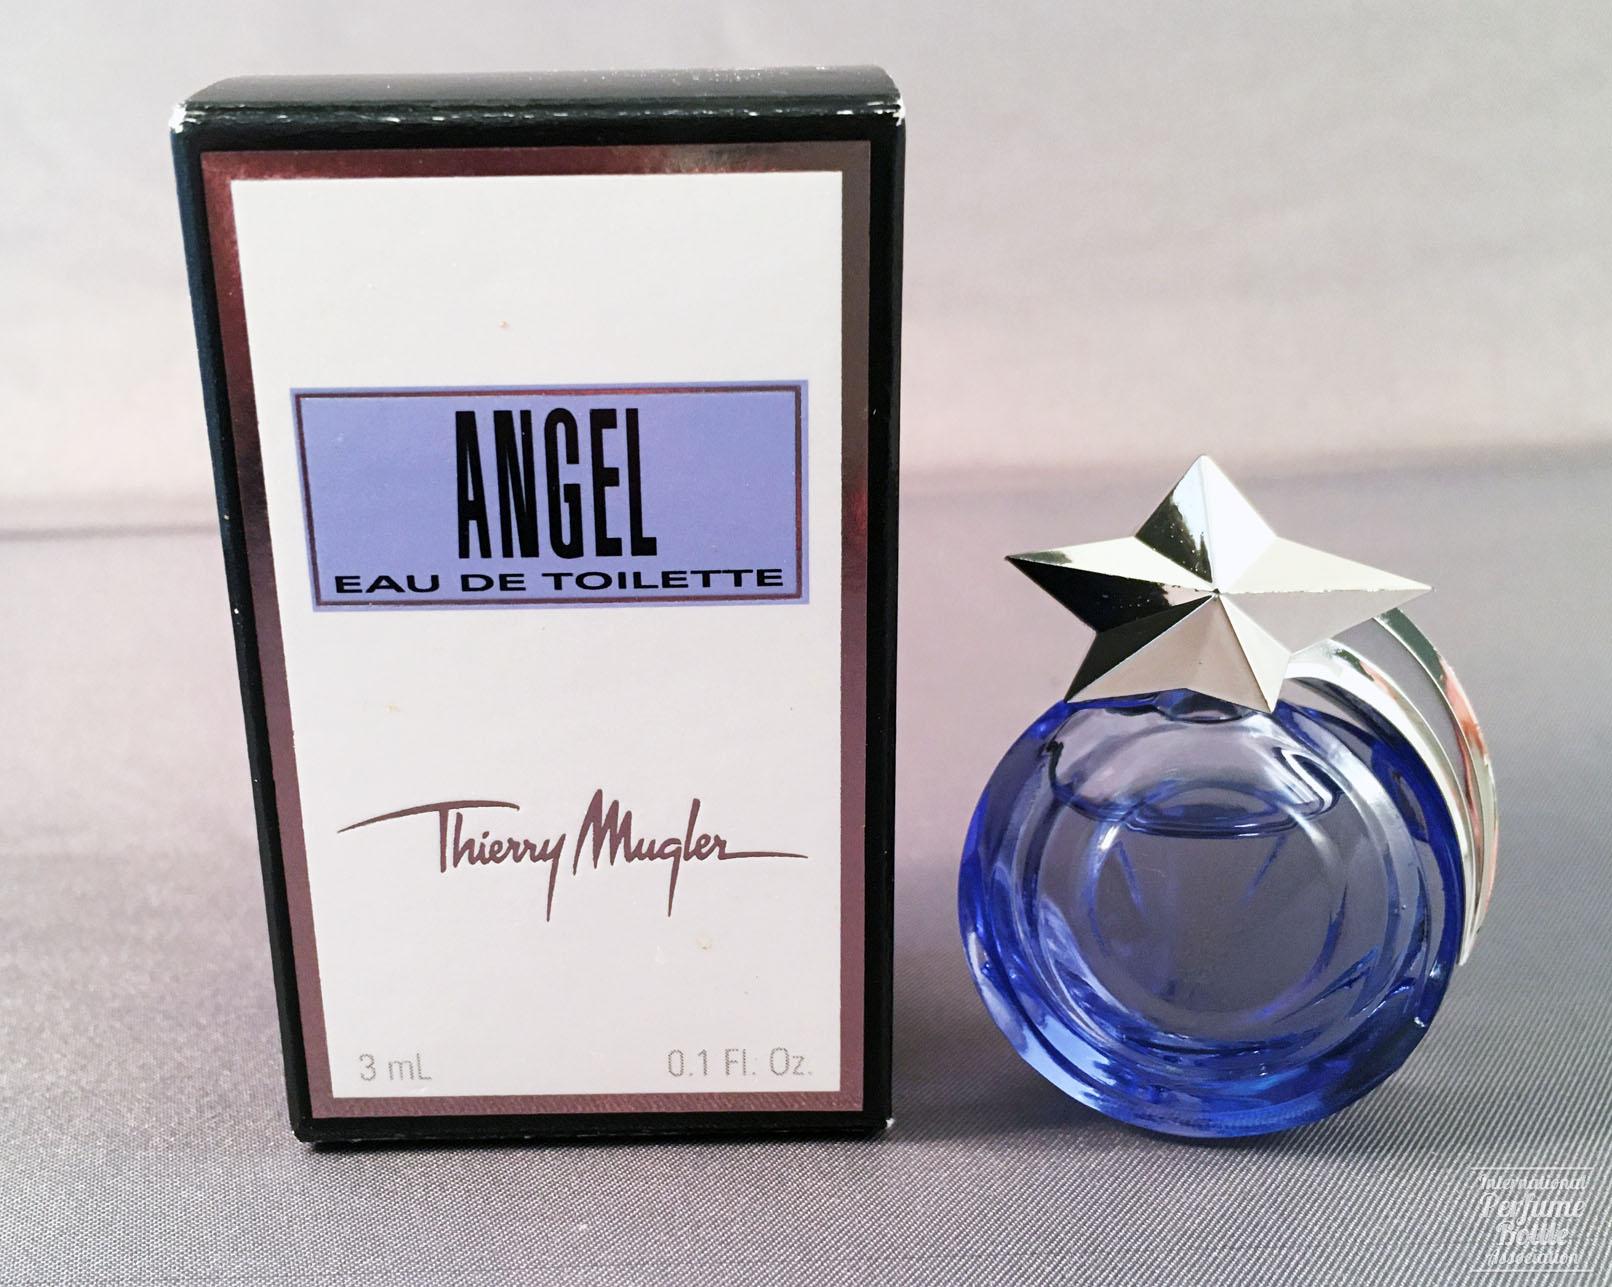 "Angel" Comet Bottle by Thierry Mugler